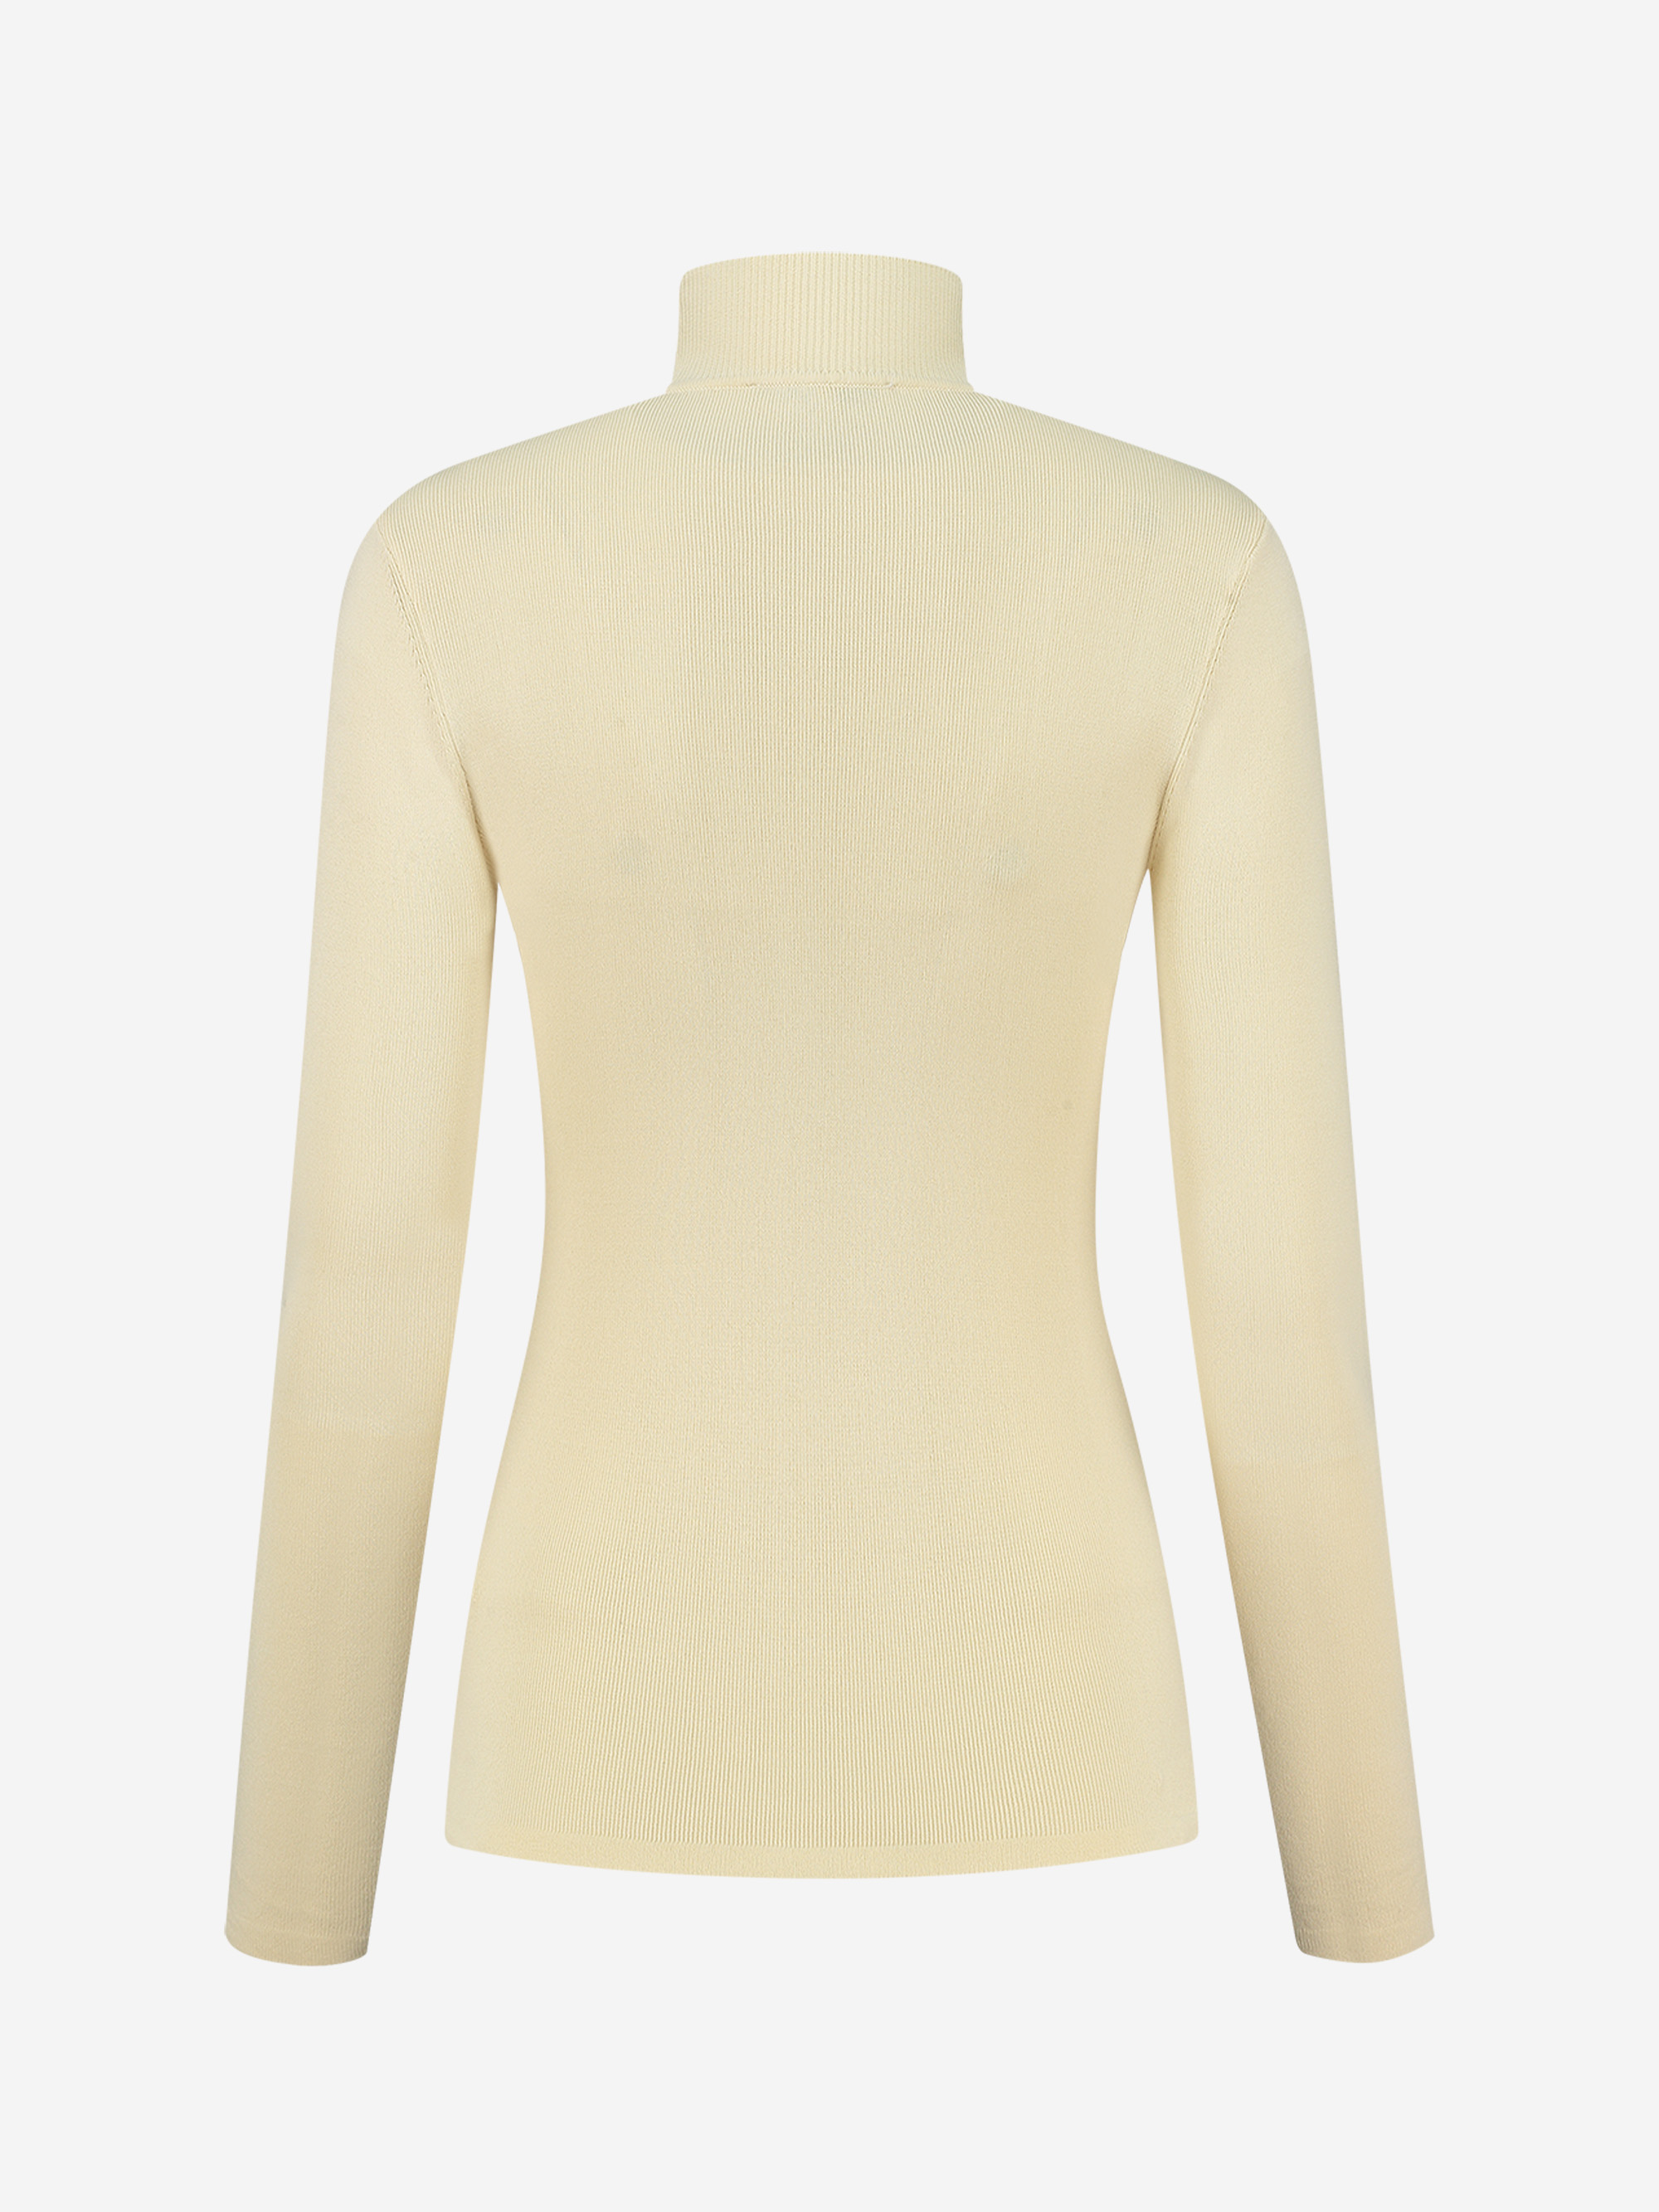 Fitted top with turtle neck 